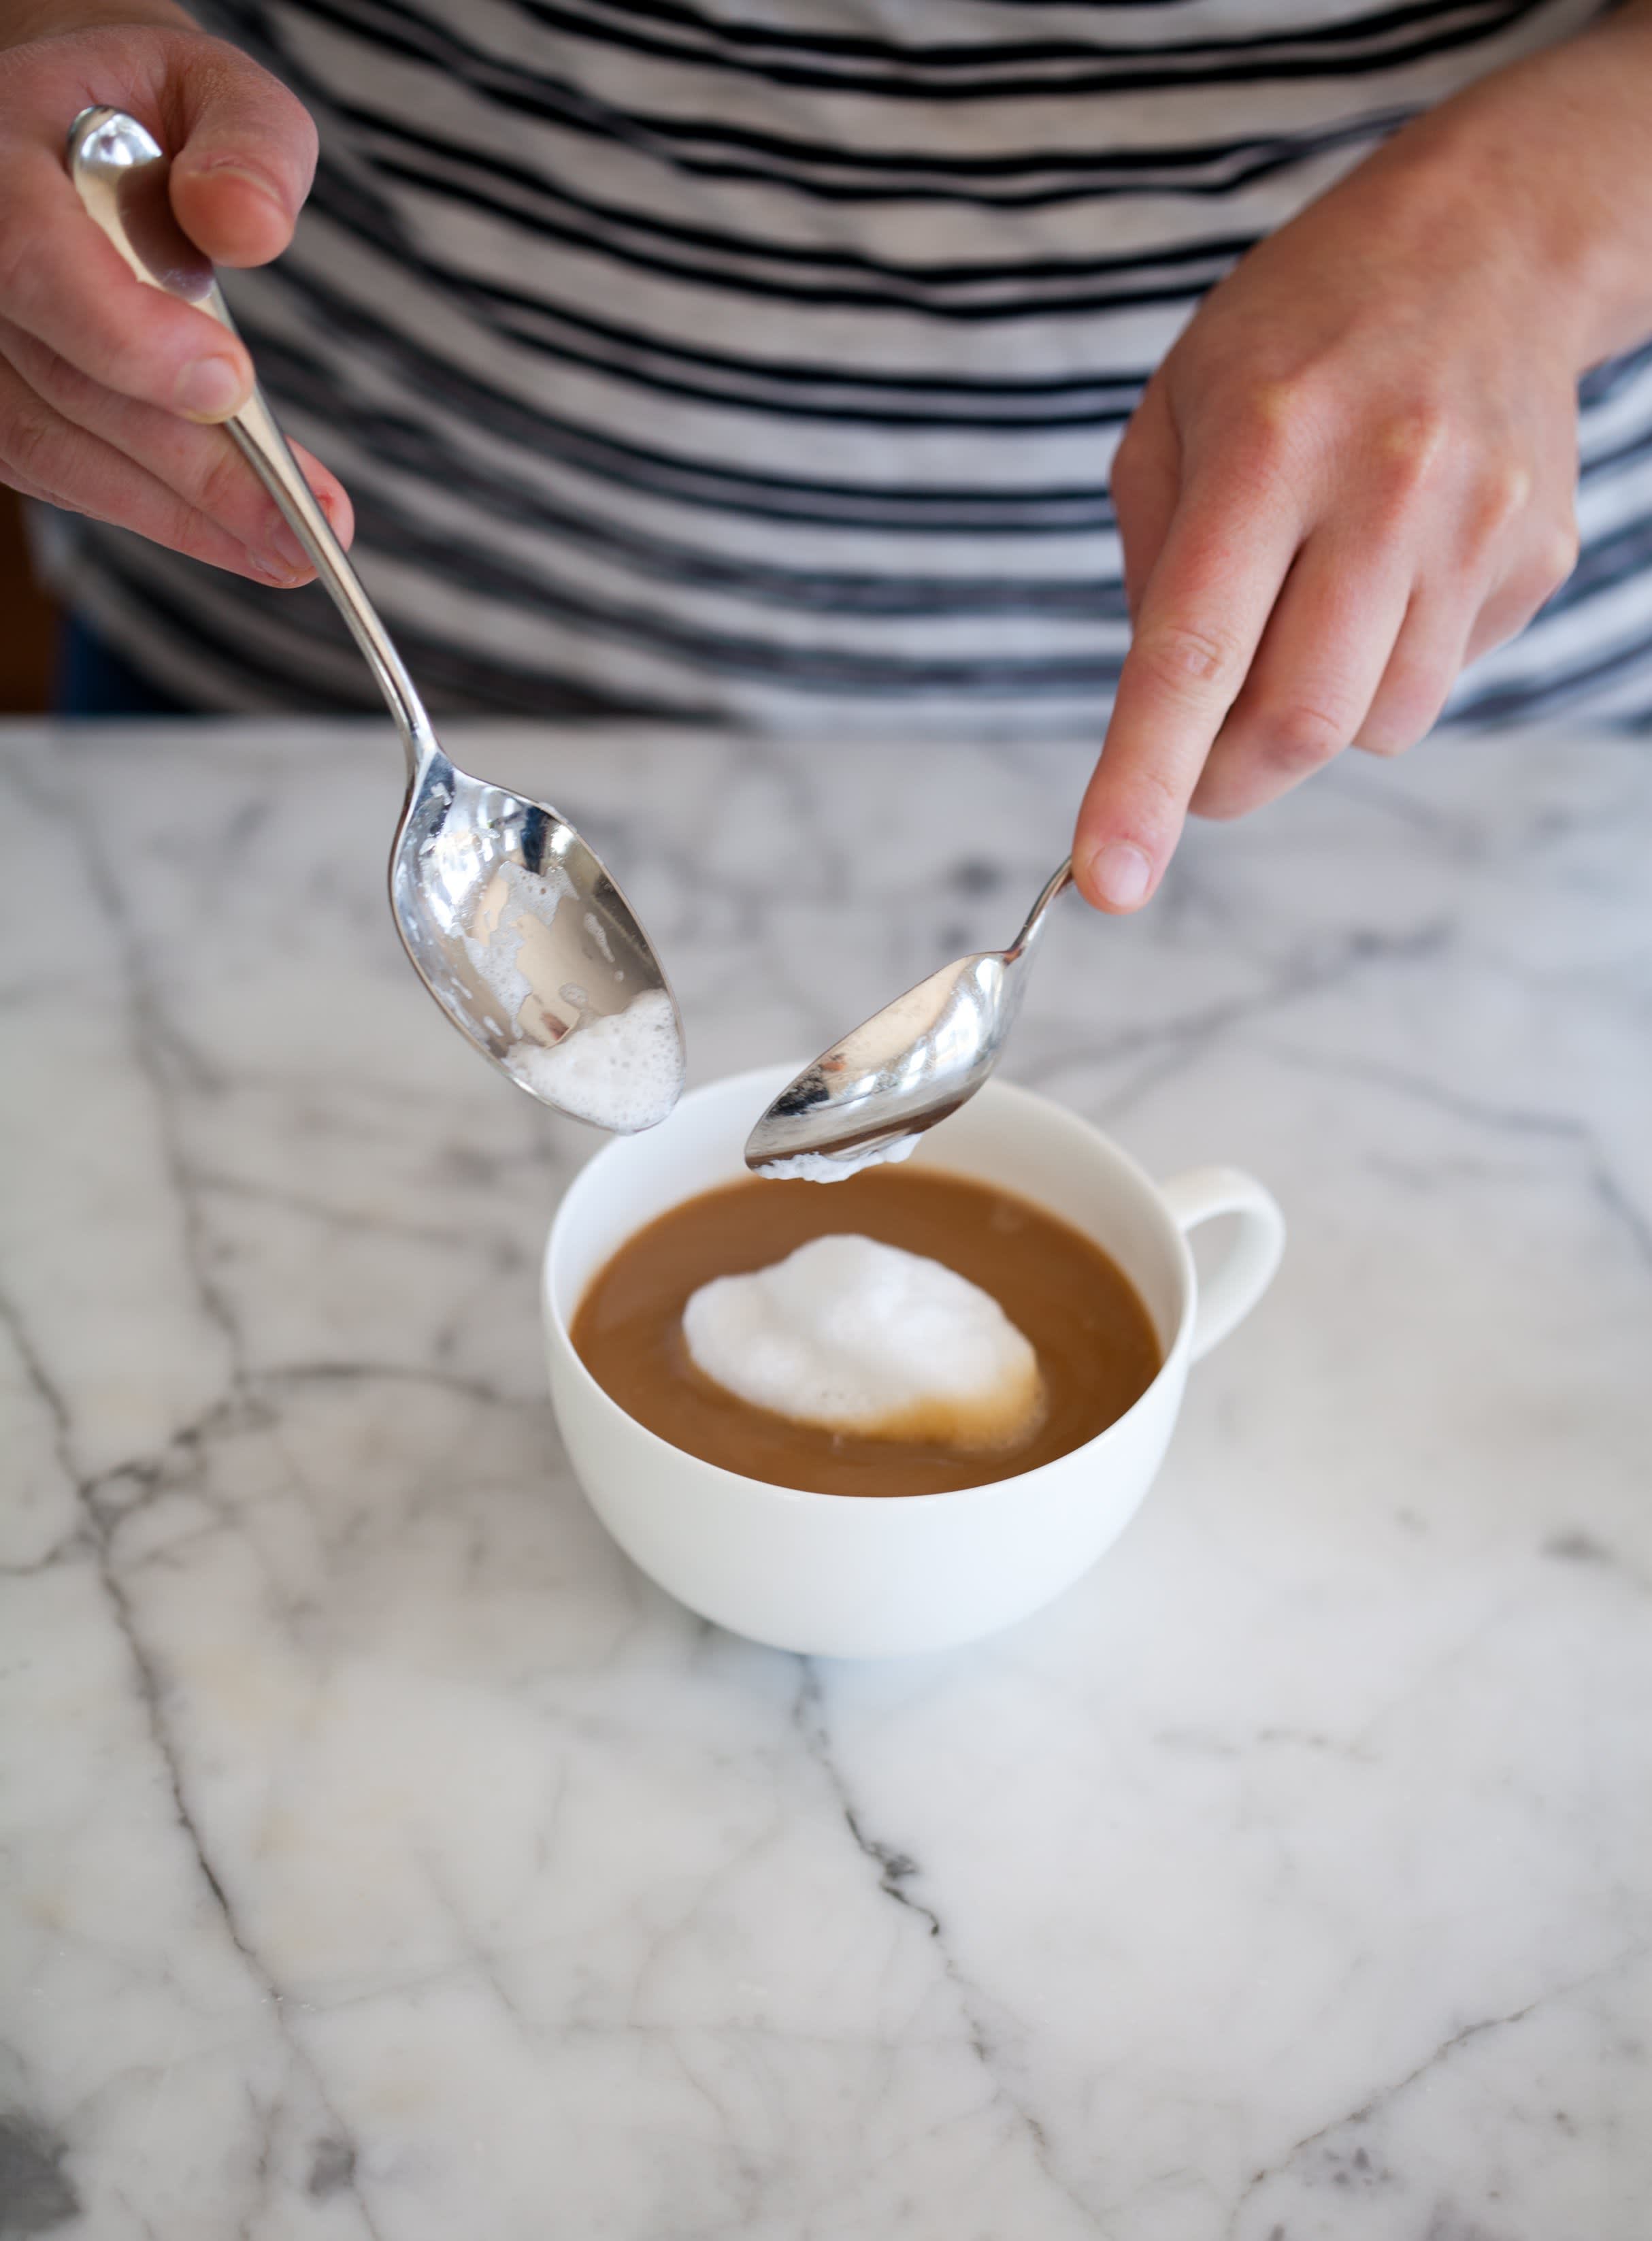 How To Make a Latte Without an Espresso Machine